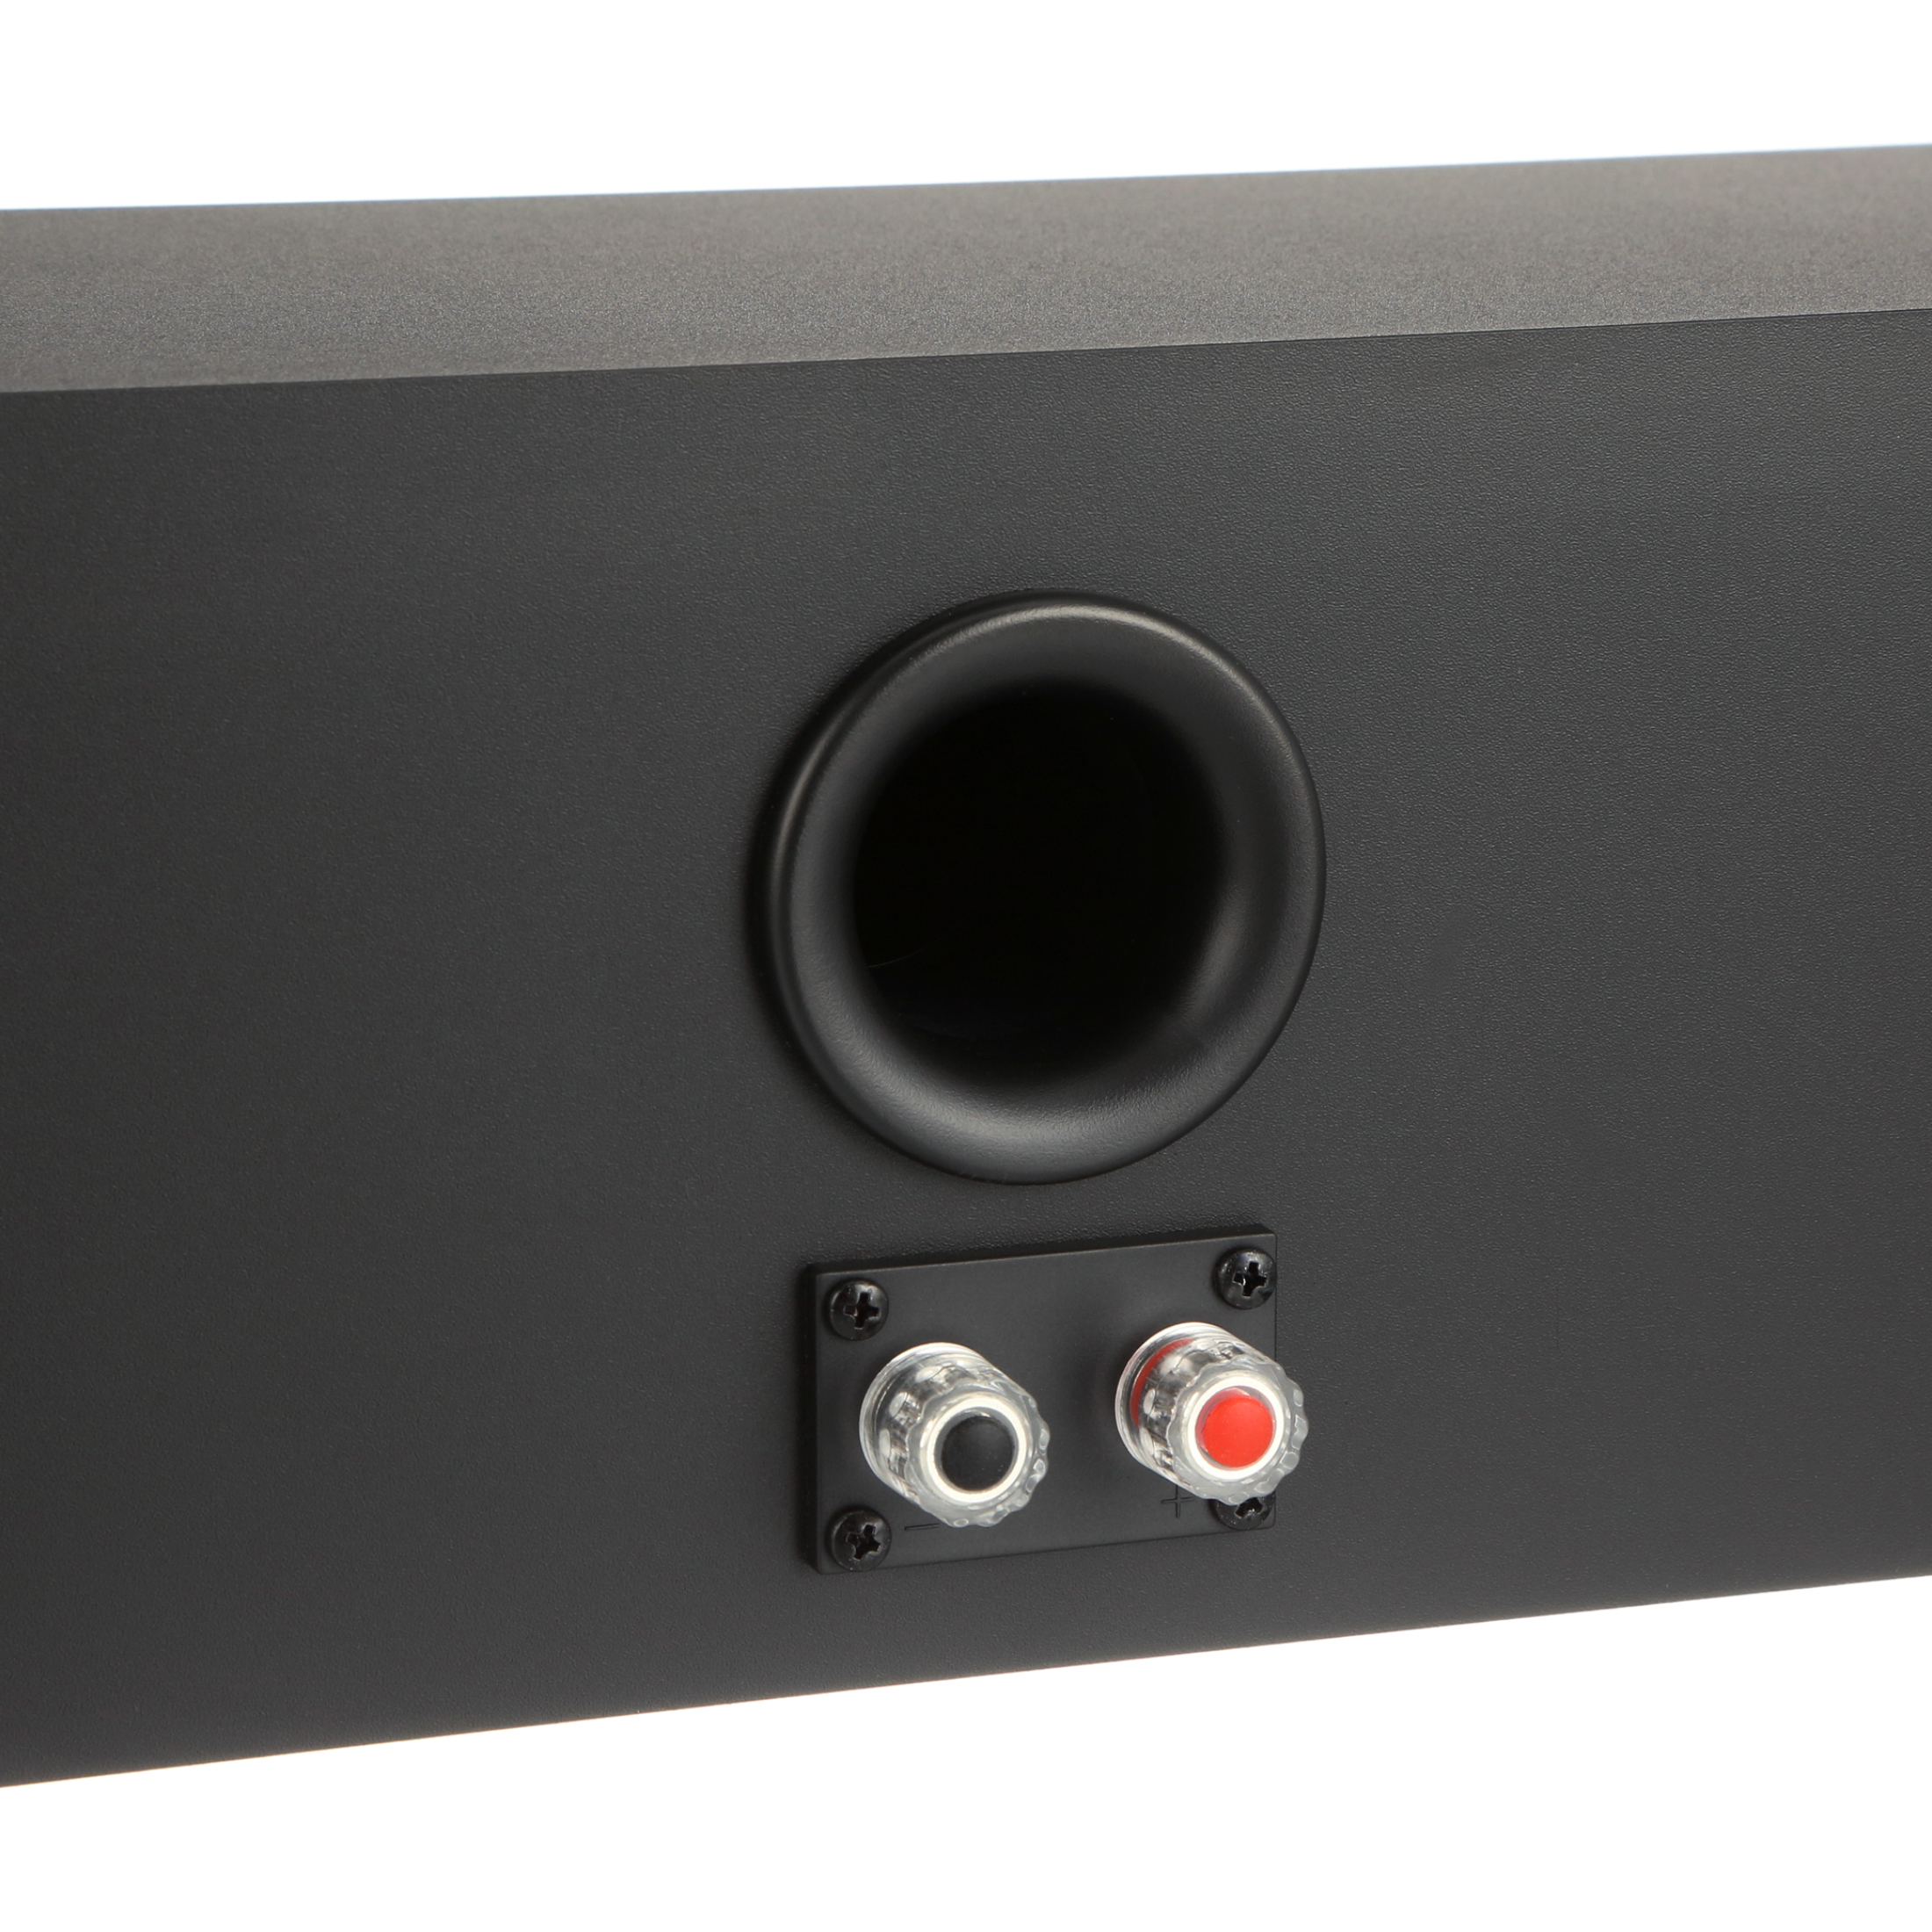 Sony SSCS8 2-Way 3-Driver Center Channel Speaker - Black - image 5 of 5